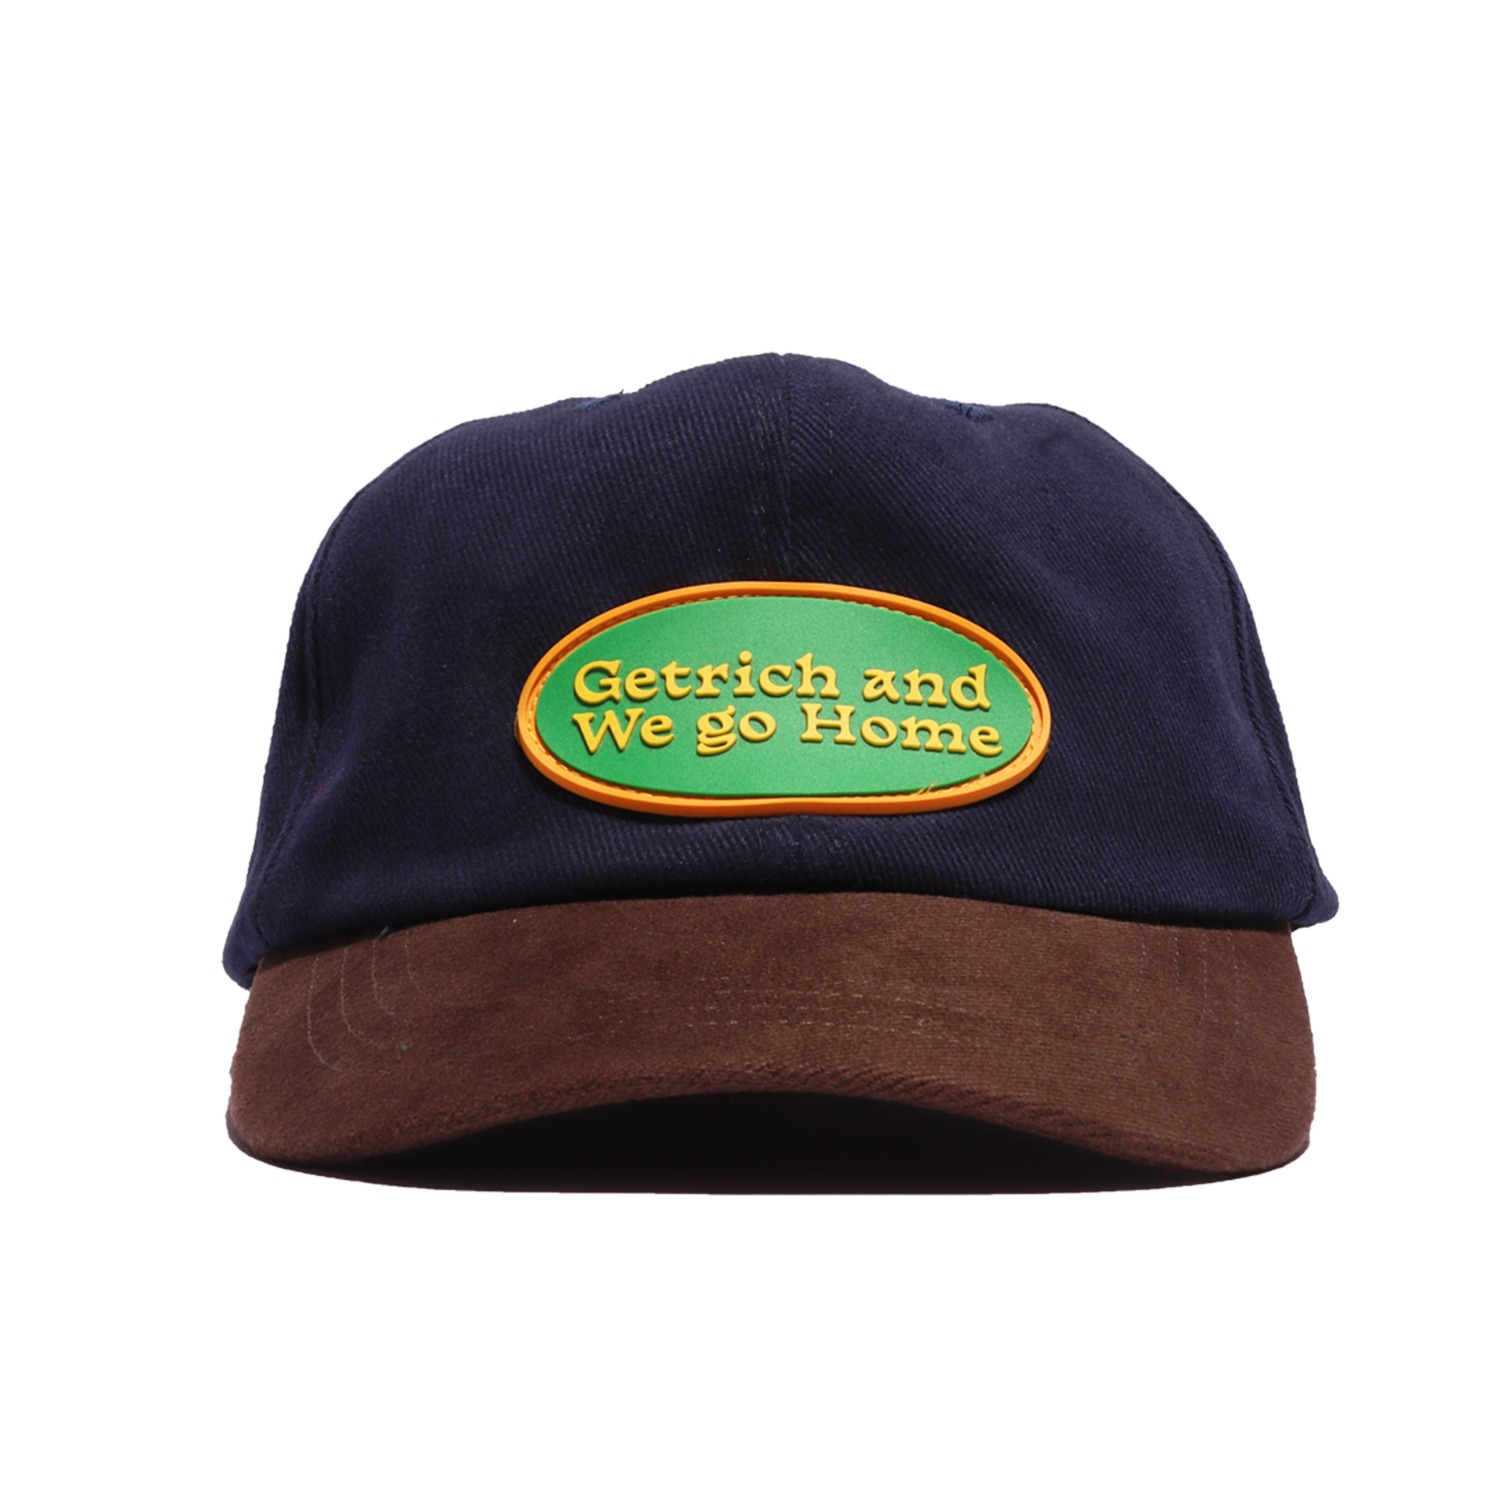 "Getrich and we go home" Cap : Navy